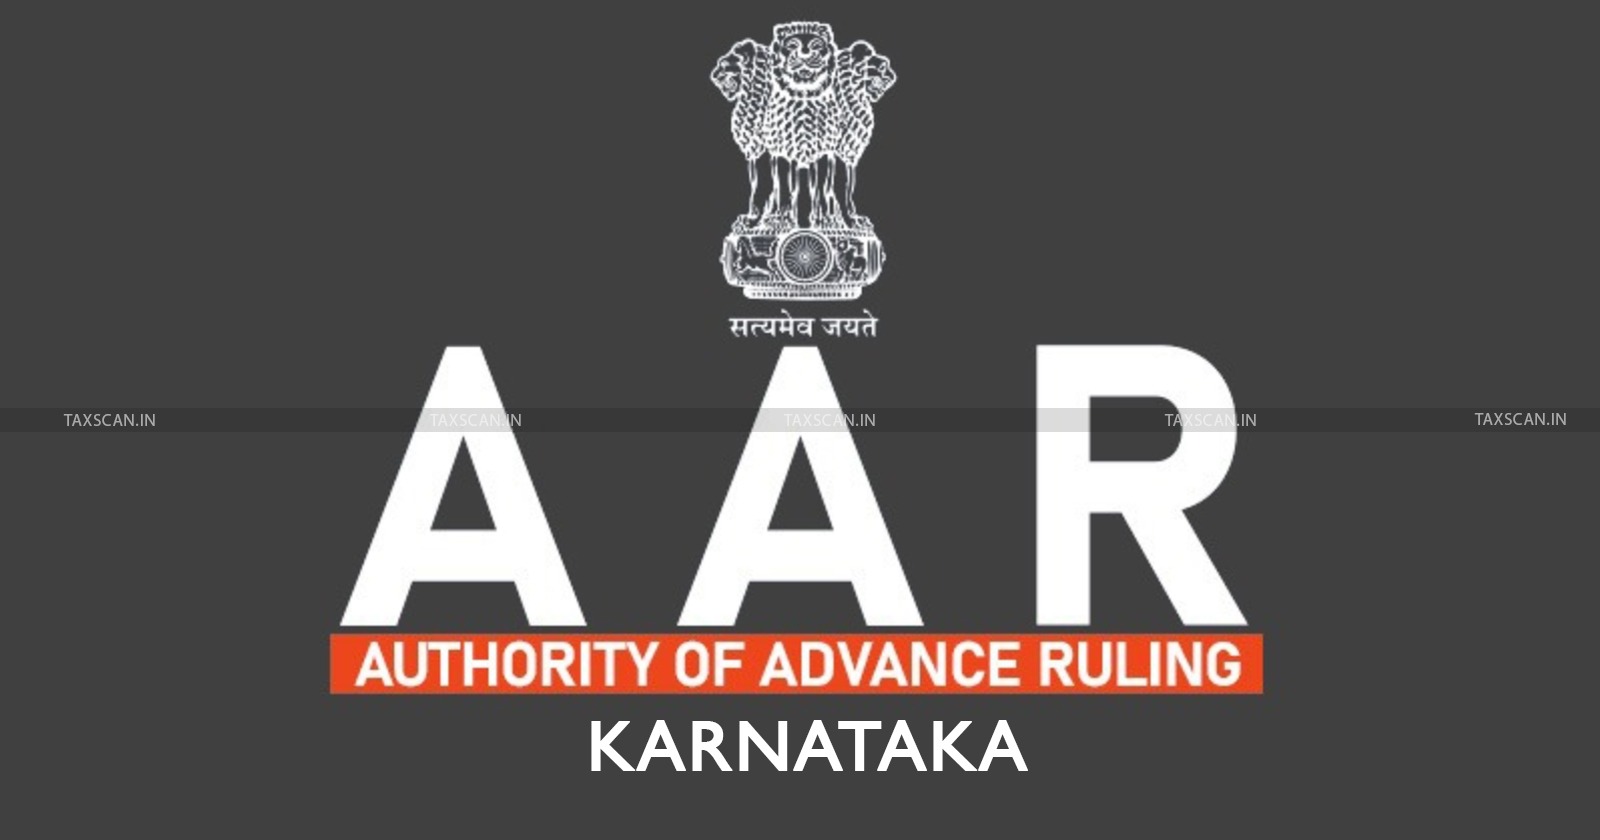 AAR - GST - Authority for advance rulings - Goods and services tax - Karnataka authority - TAXSCAN